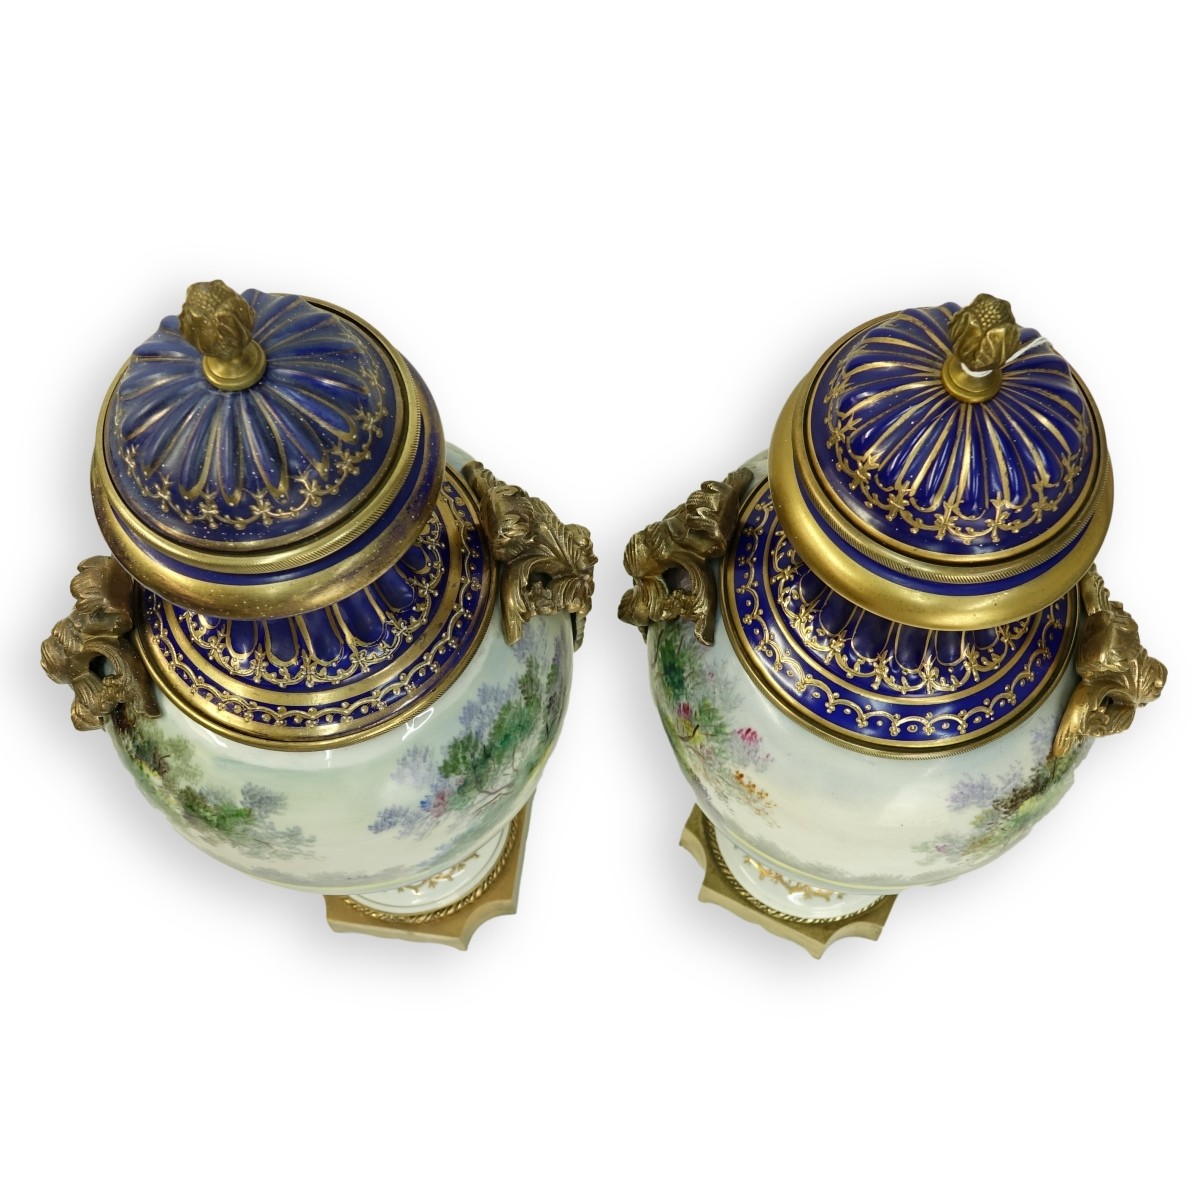 Large Sevres Style Urns